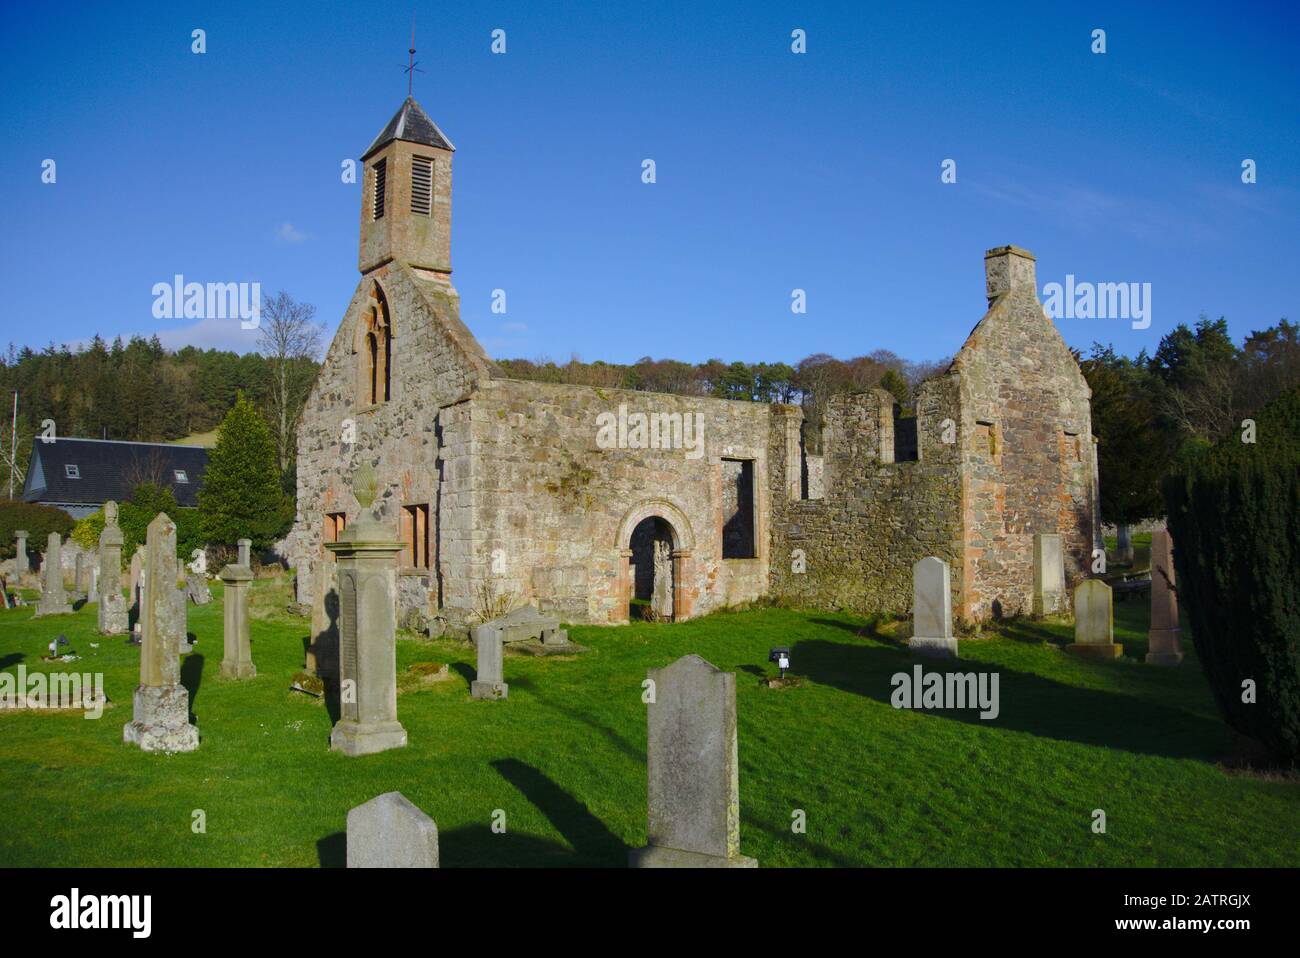 Auld Kirk and graveyard in Stow, Scottish Borders, UK. Stock Photo